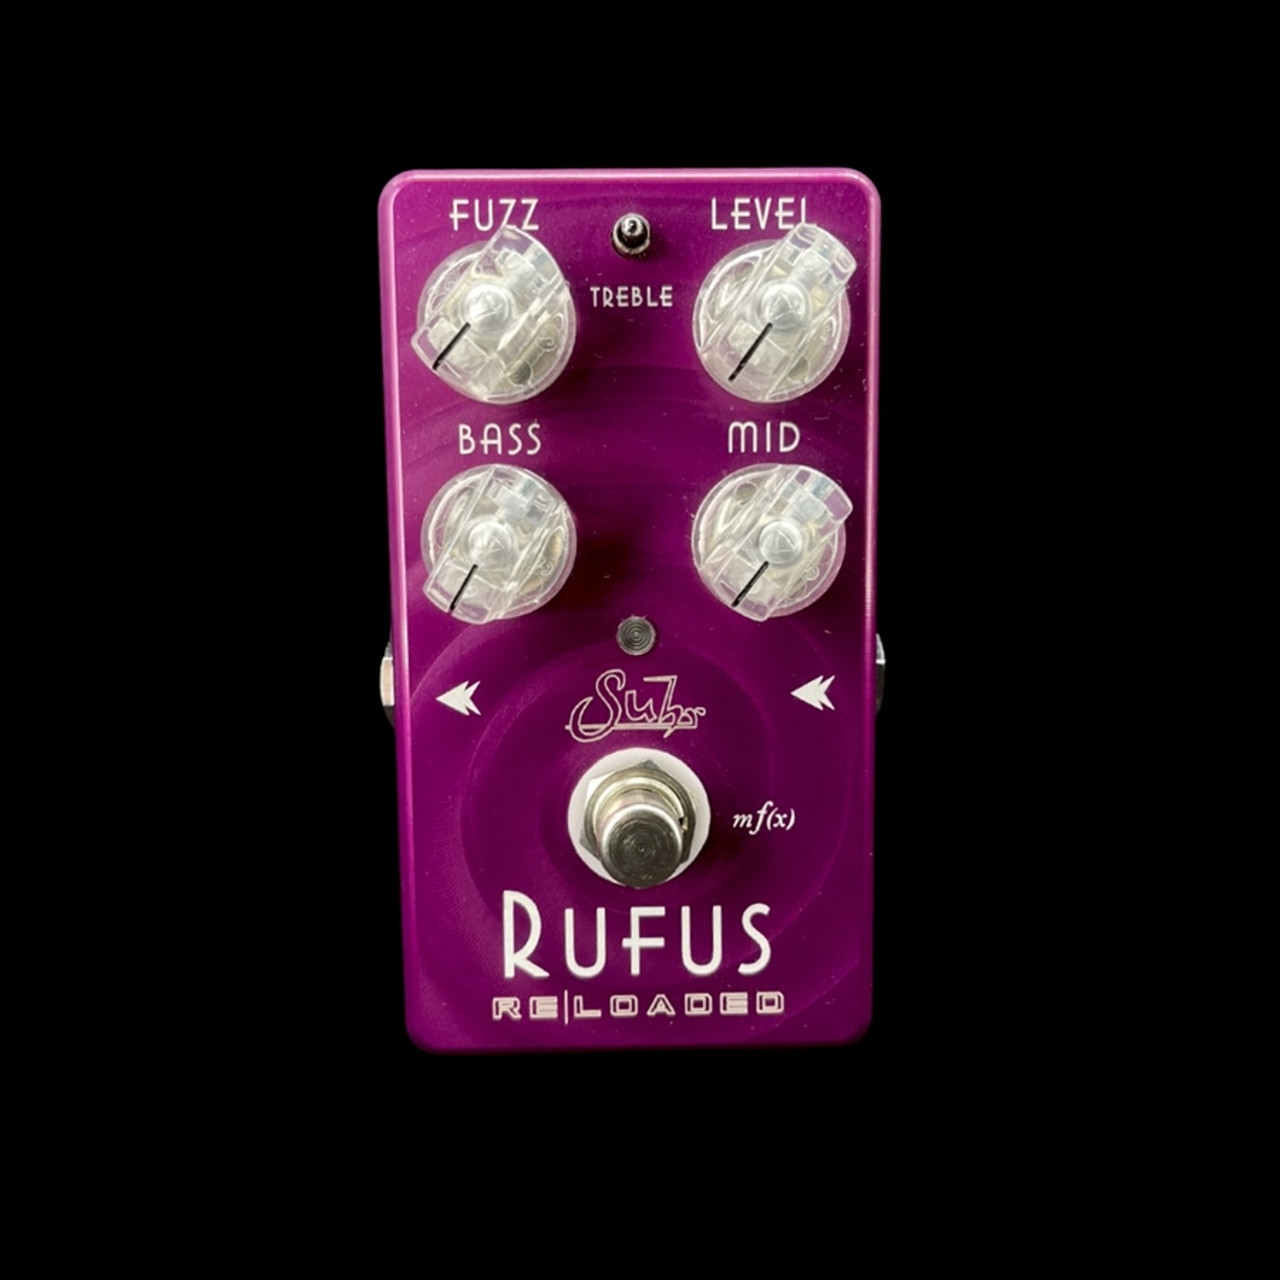 Suhr Rufus Reloaded Fuzz Purple Limited Edition